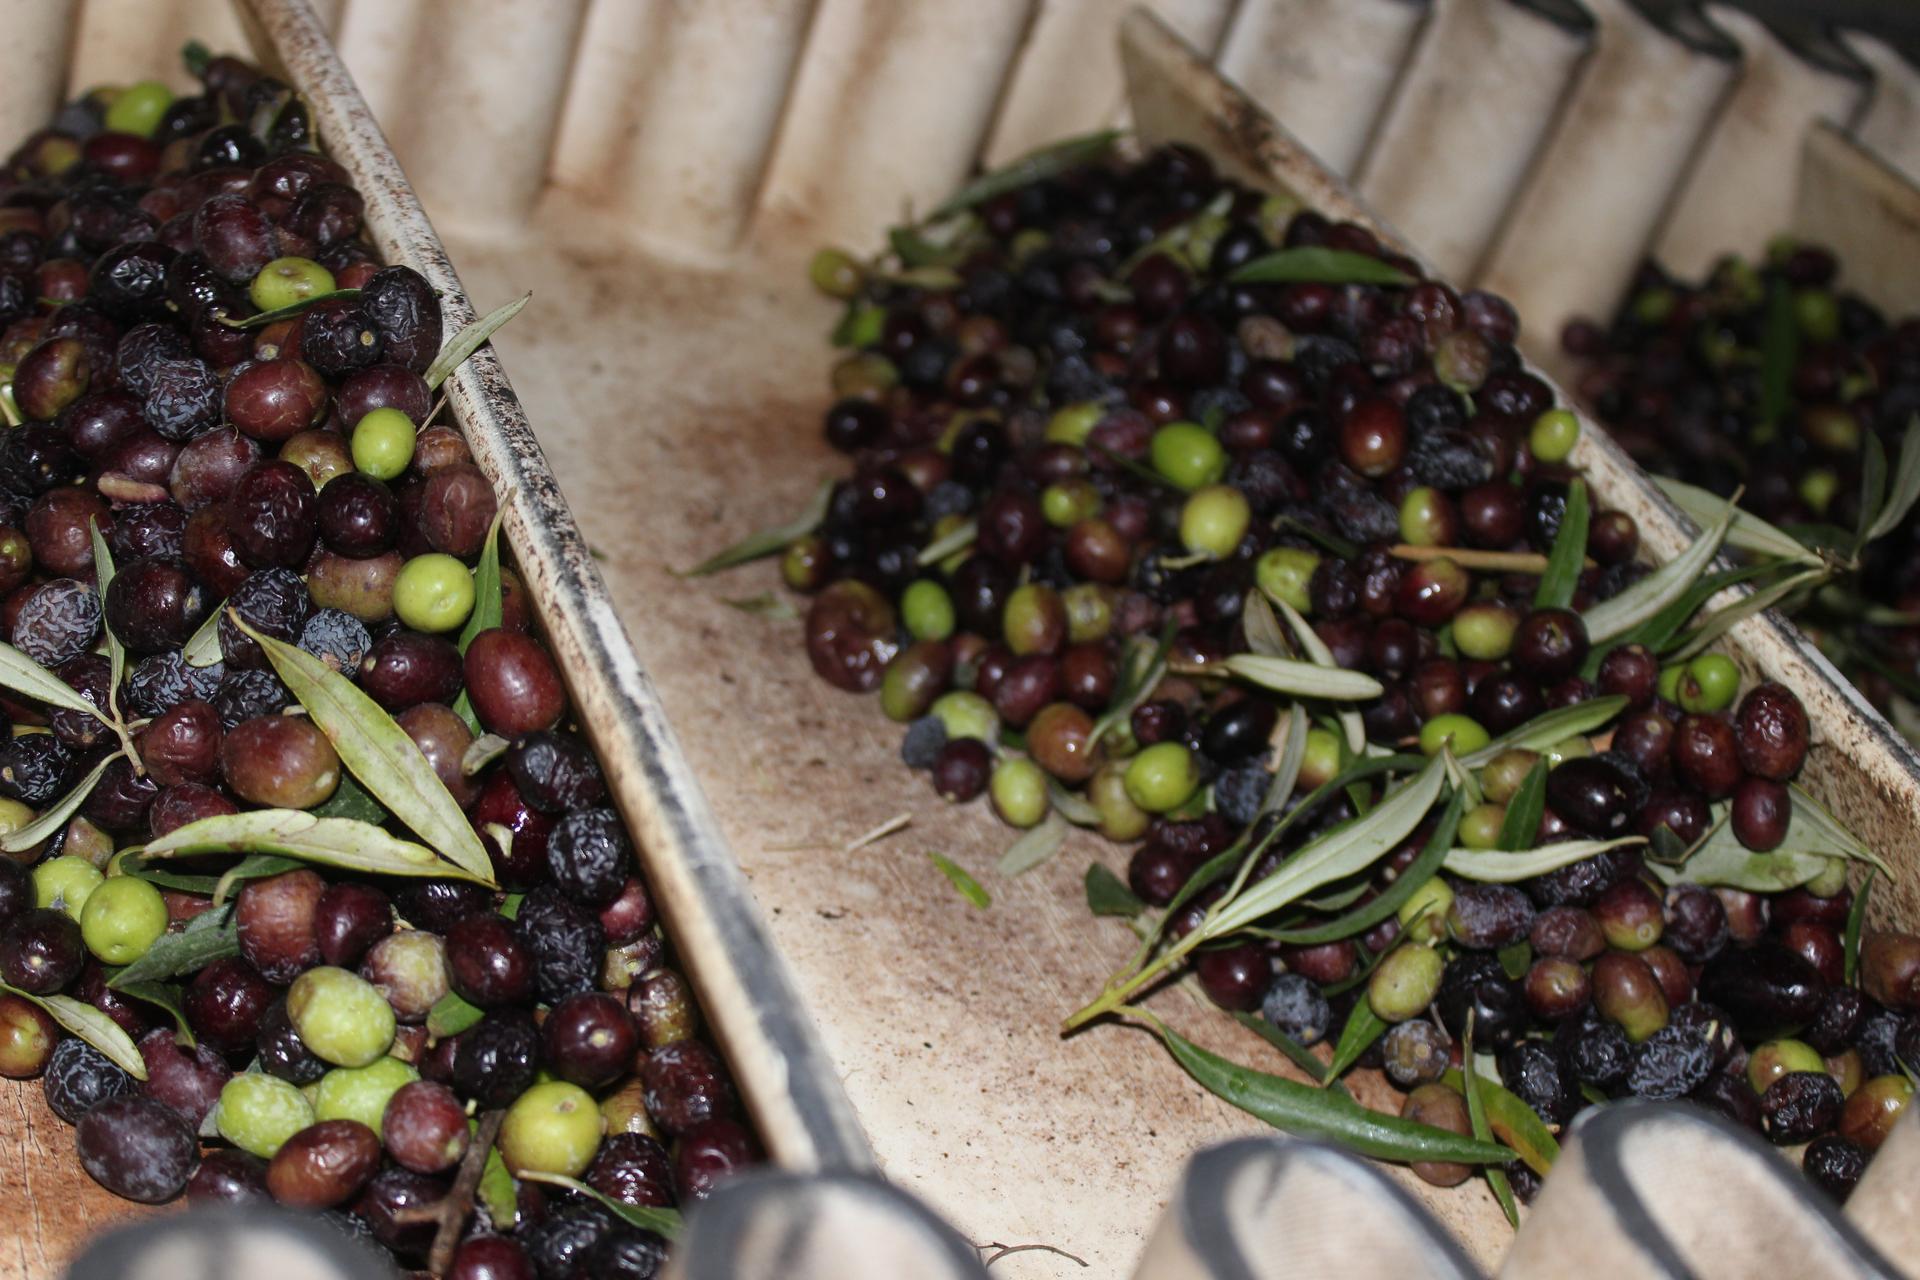 Olives awaiting processing